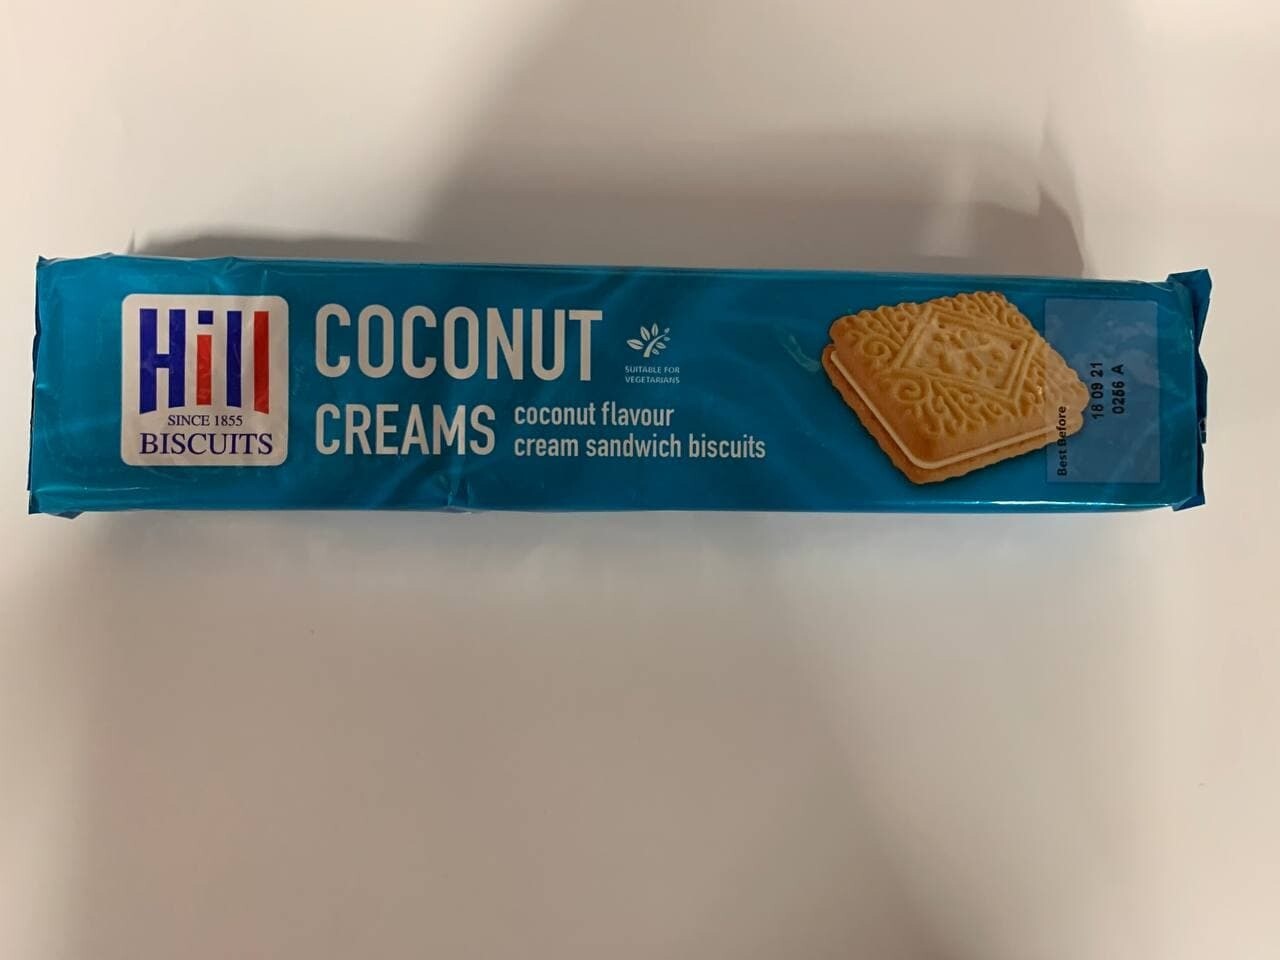 Hill Coconut Cream Biscuits 150g